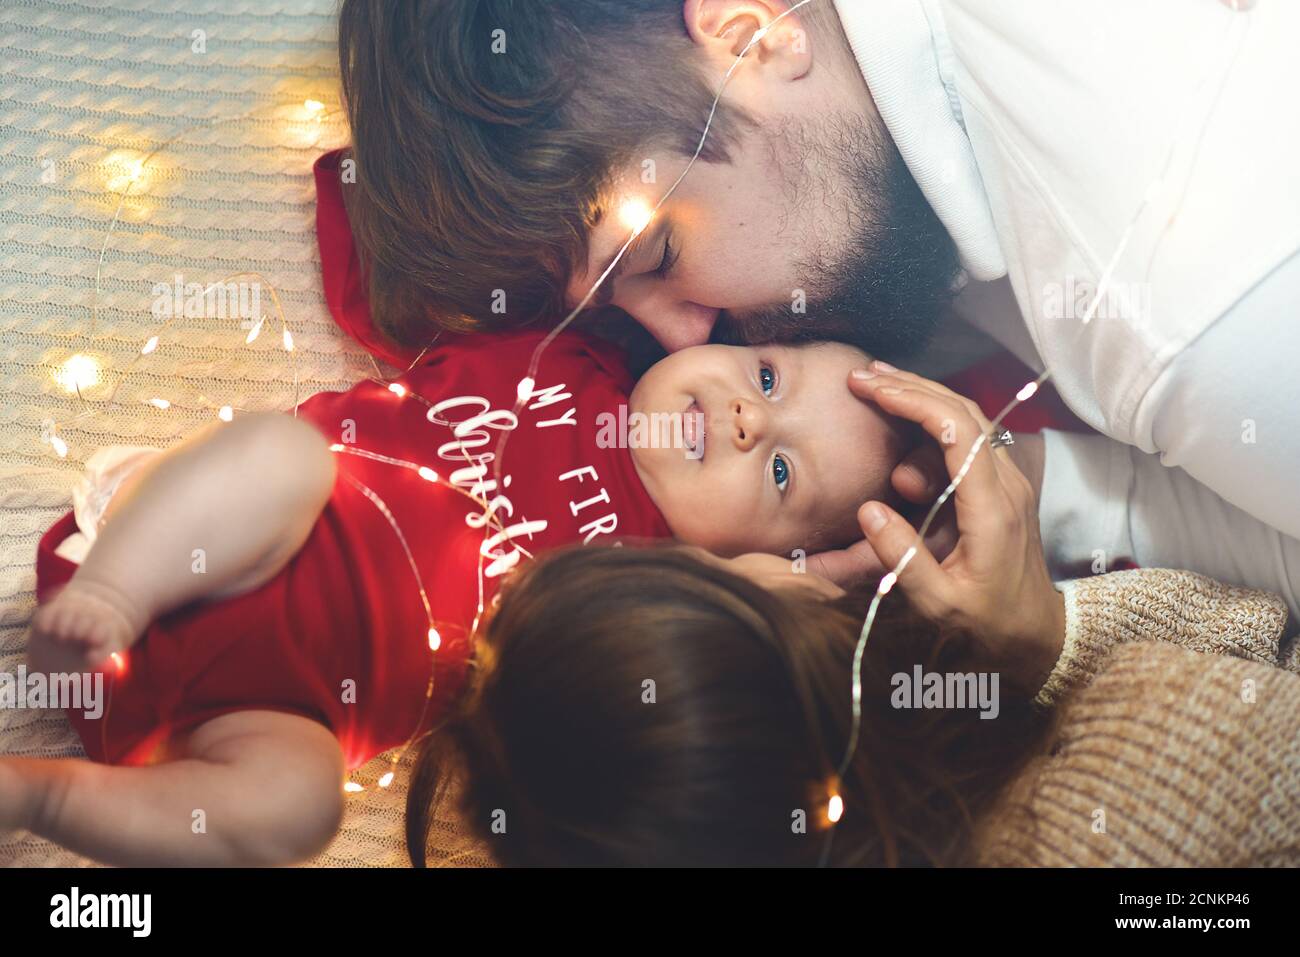 Family, Love, Happiness Concepts.Parents kissing the baby's cheek. Happy family. Stock Photo